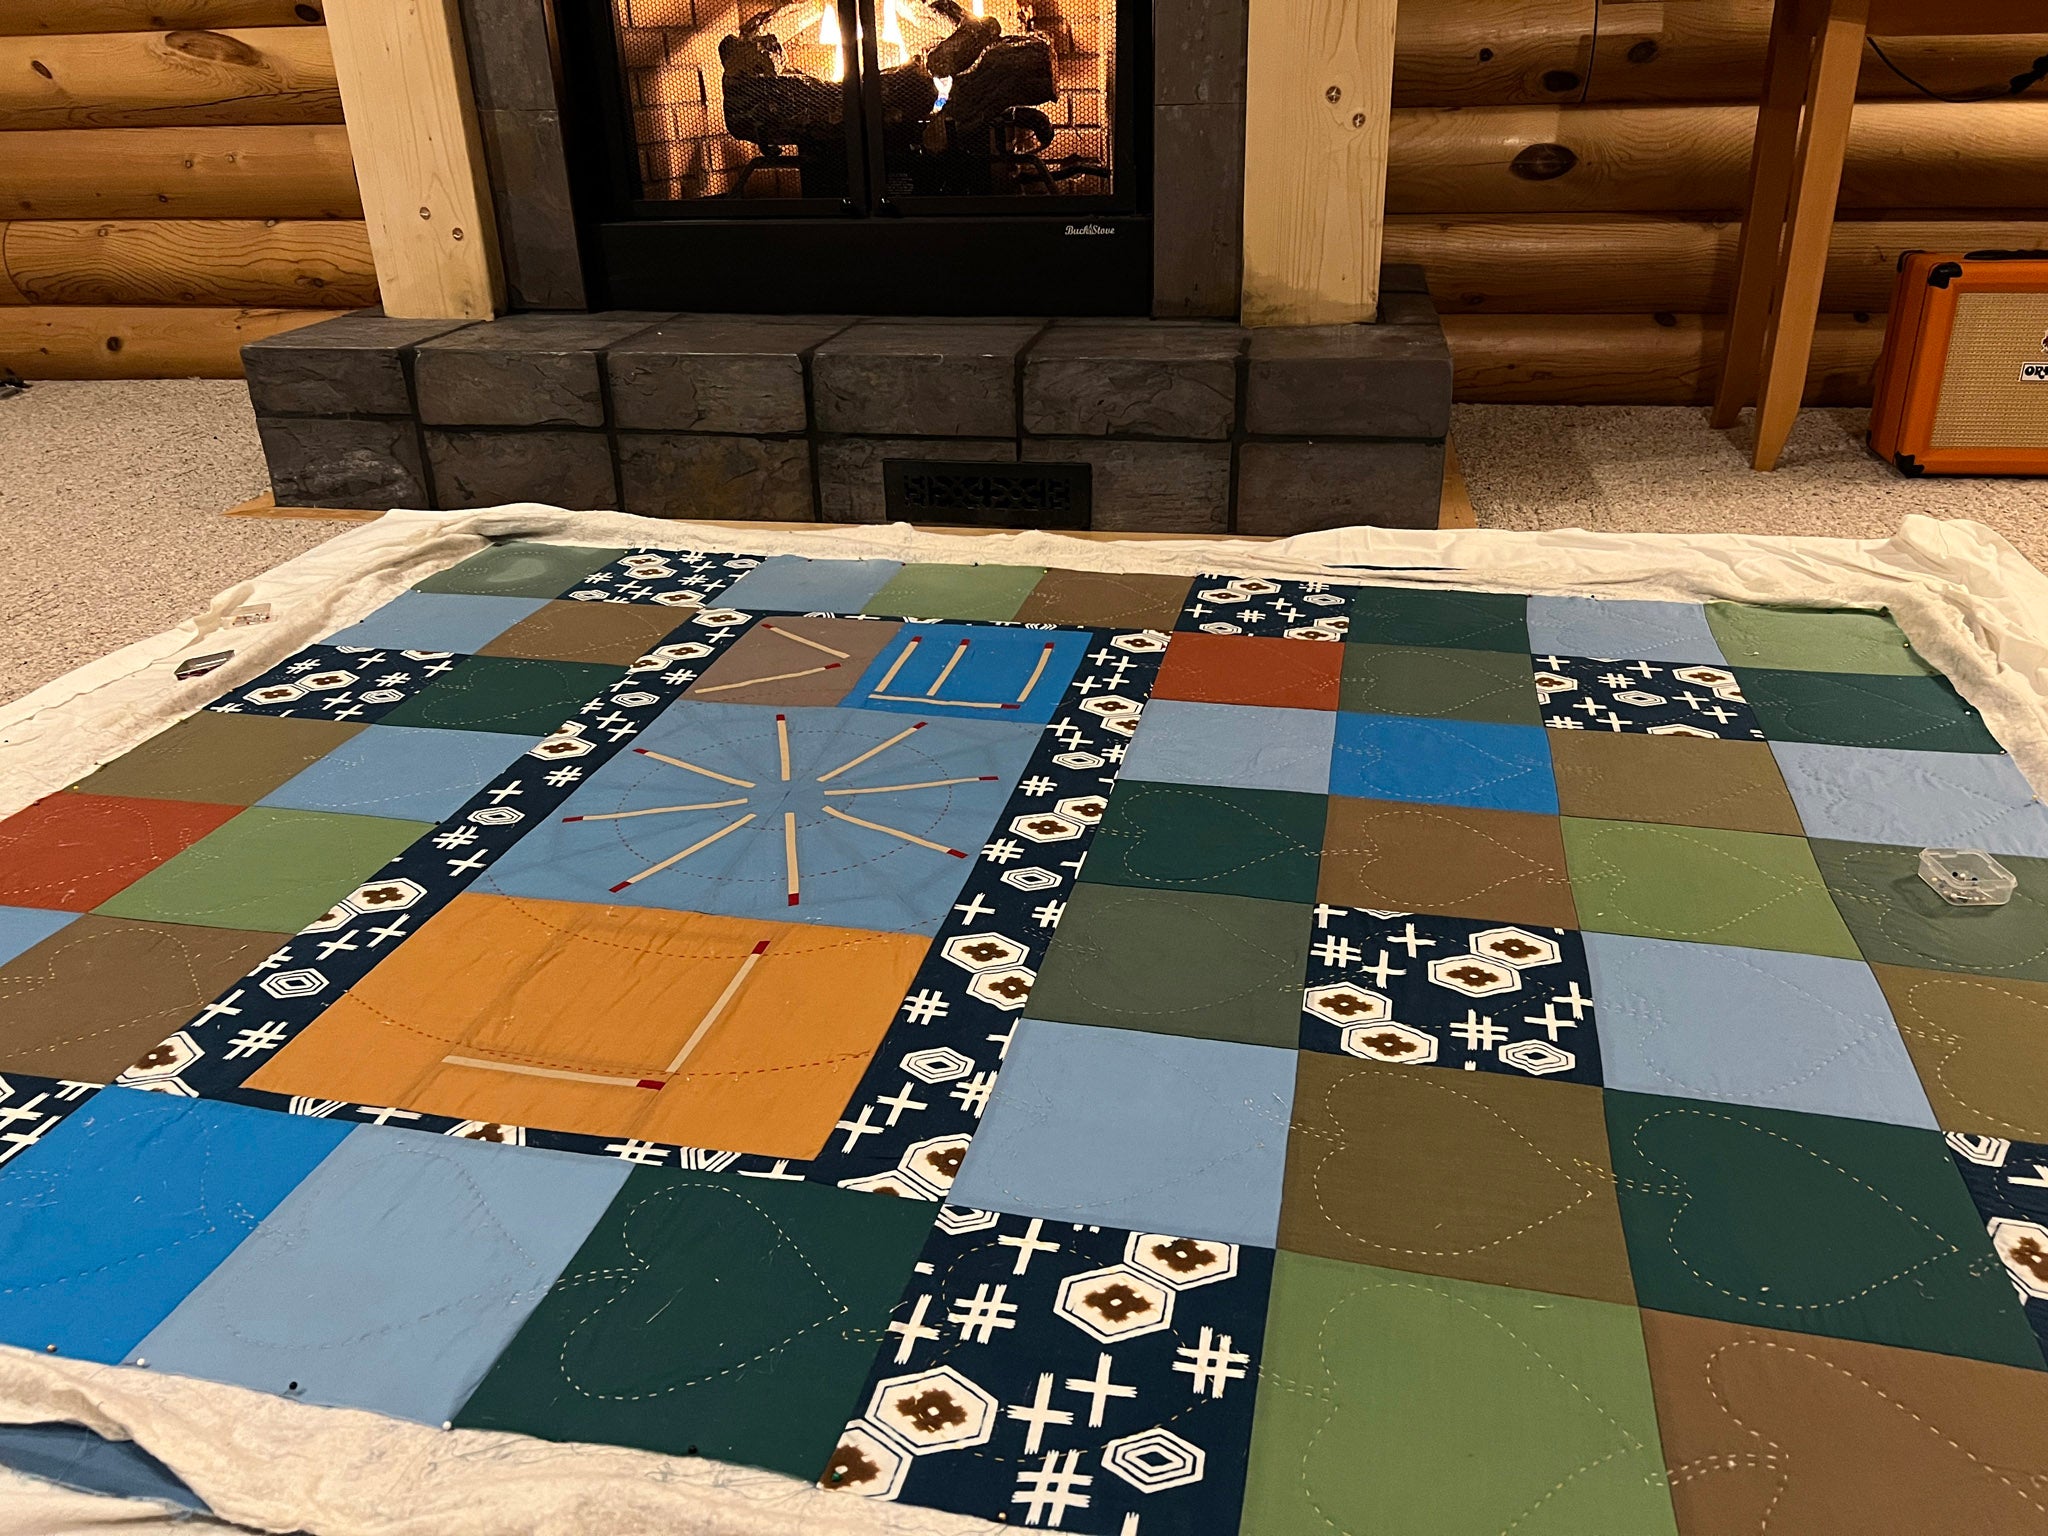 Quilt blocking process by Patricia Belyea of Okan Arts